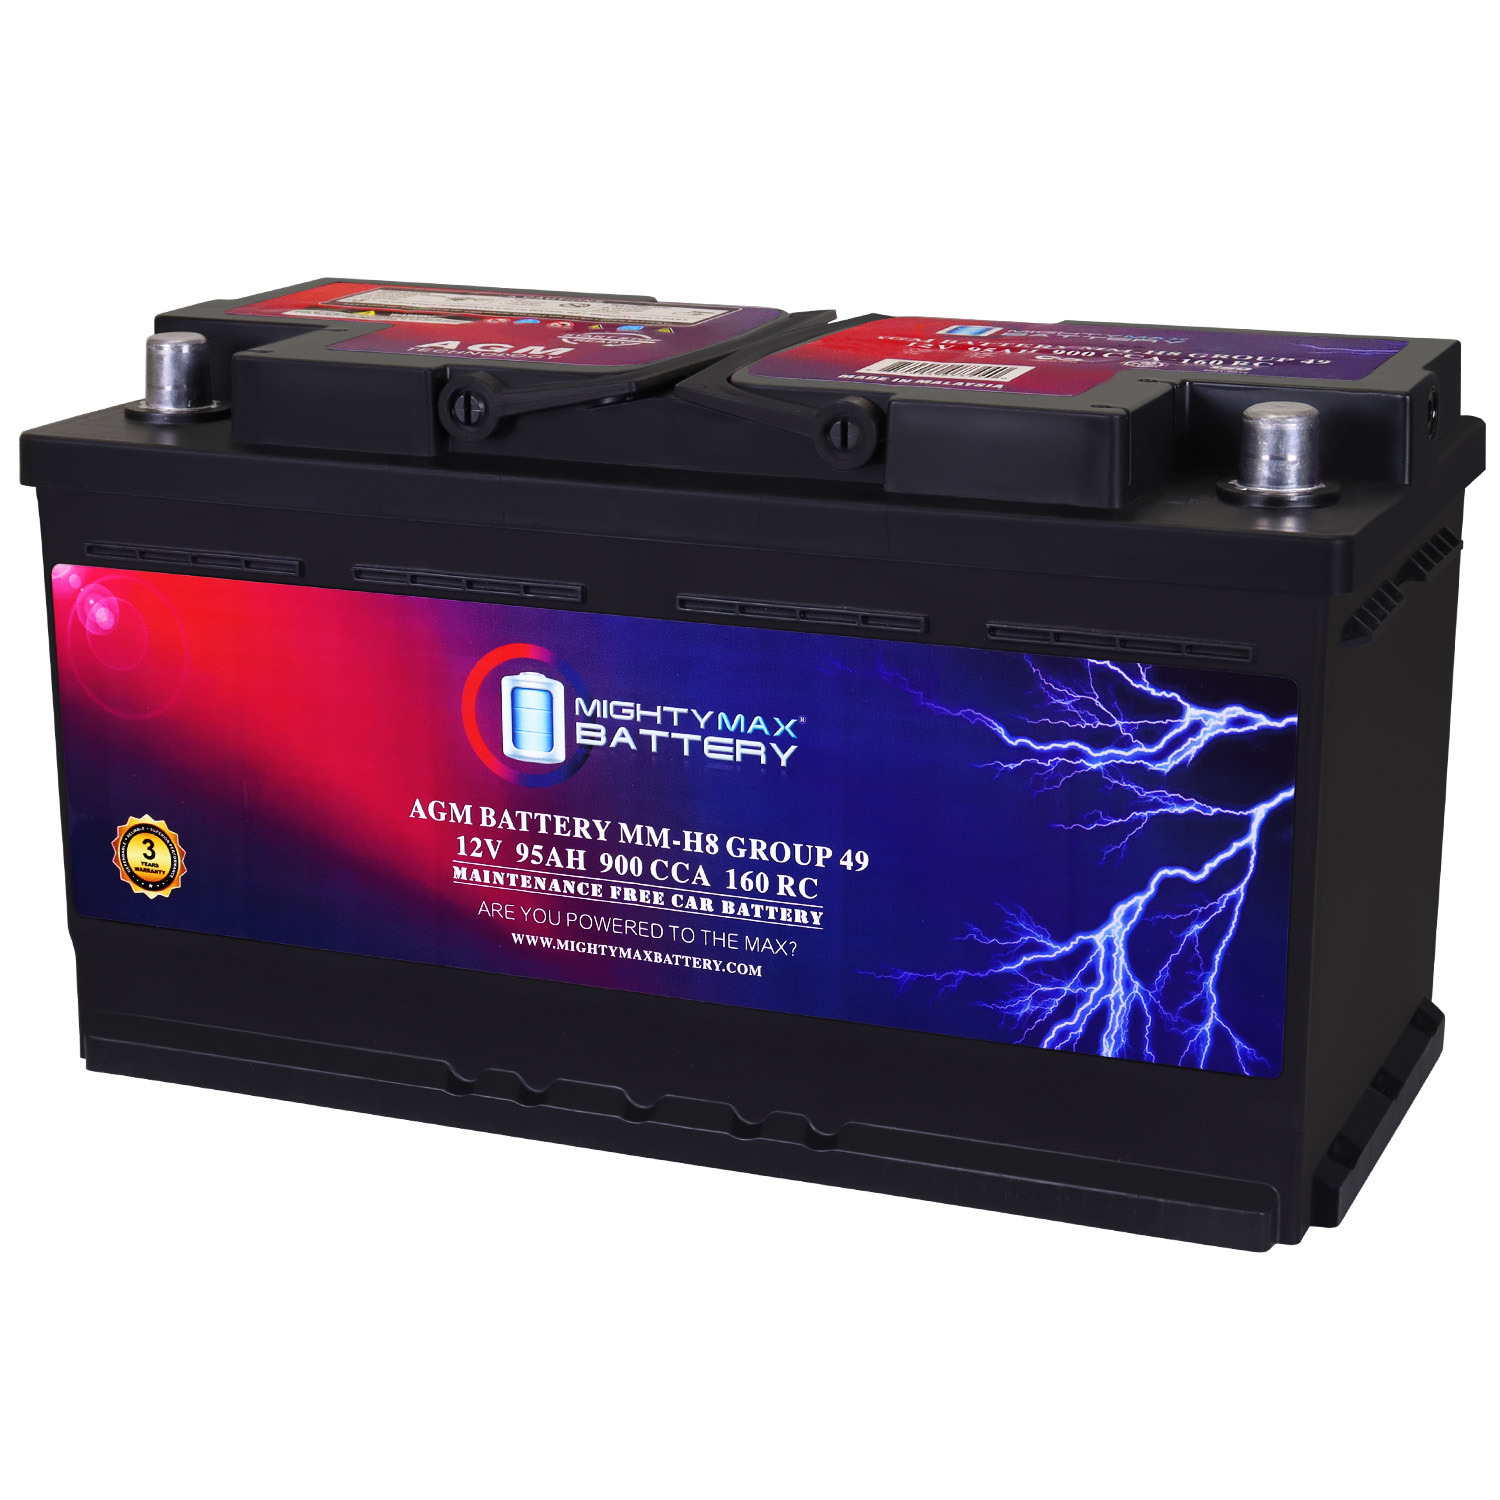 MM-H8 Group 49 12V 95Ah 160RC 900CCA Replacement Battery Compatible with Mercedes-Benz 280SEL 73